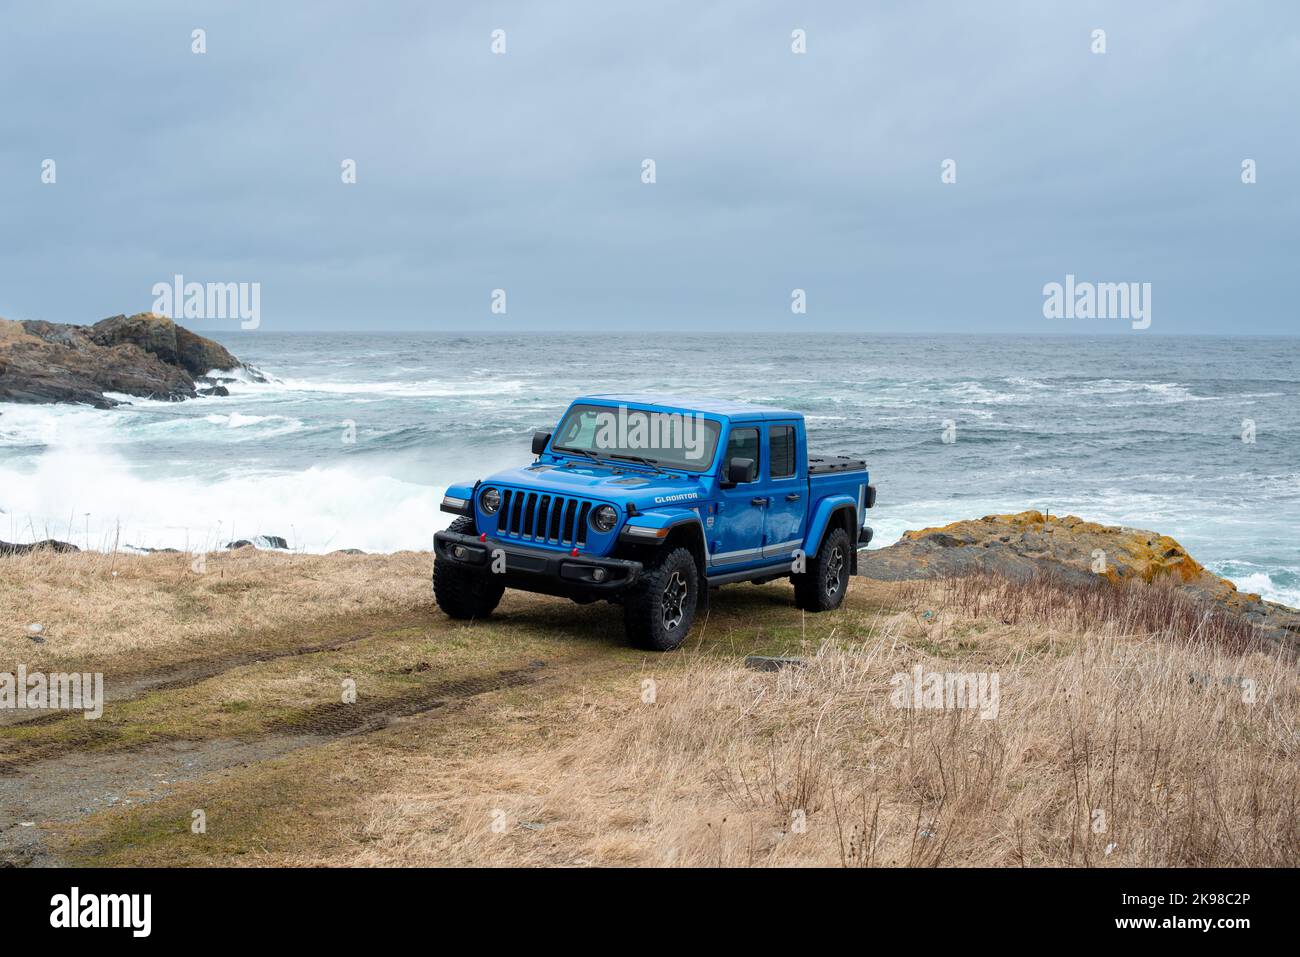 St. John's, Newfoundland, Canada, August 2022: A vibrant blue Jeep Gladiator Rubicon truck 4x4 off road and parked on an old airport runway. Stock Photo